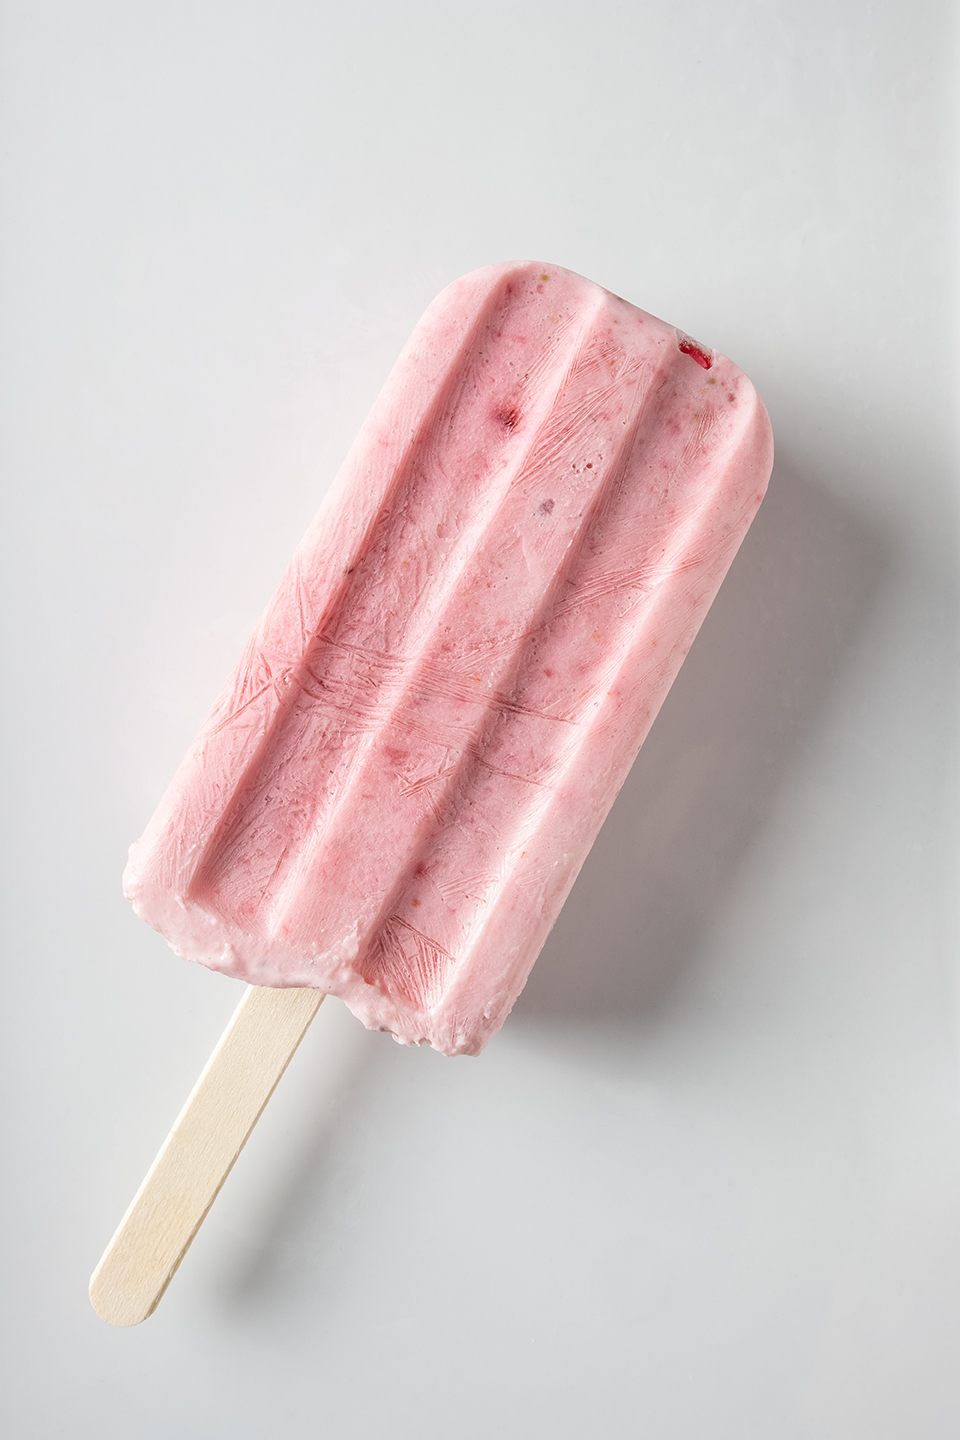  Creamy strawberry and greek yogurt popsicle on a white background. Shot from above. 